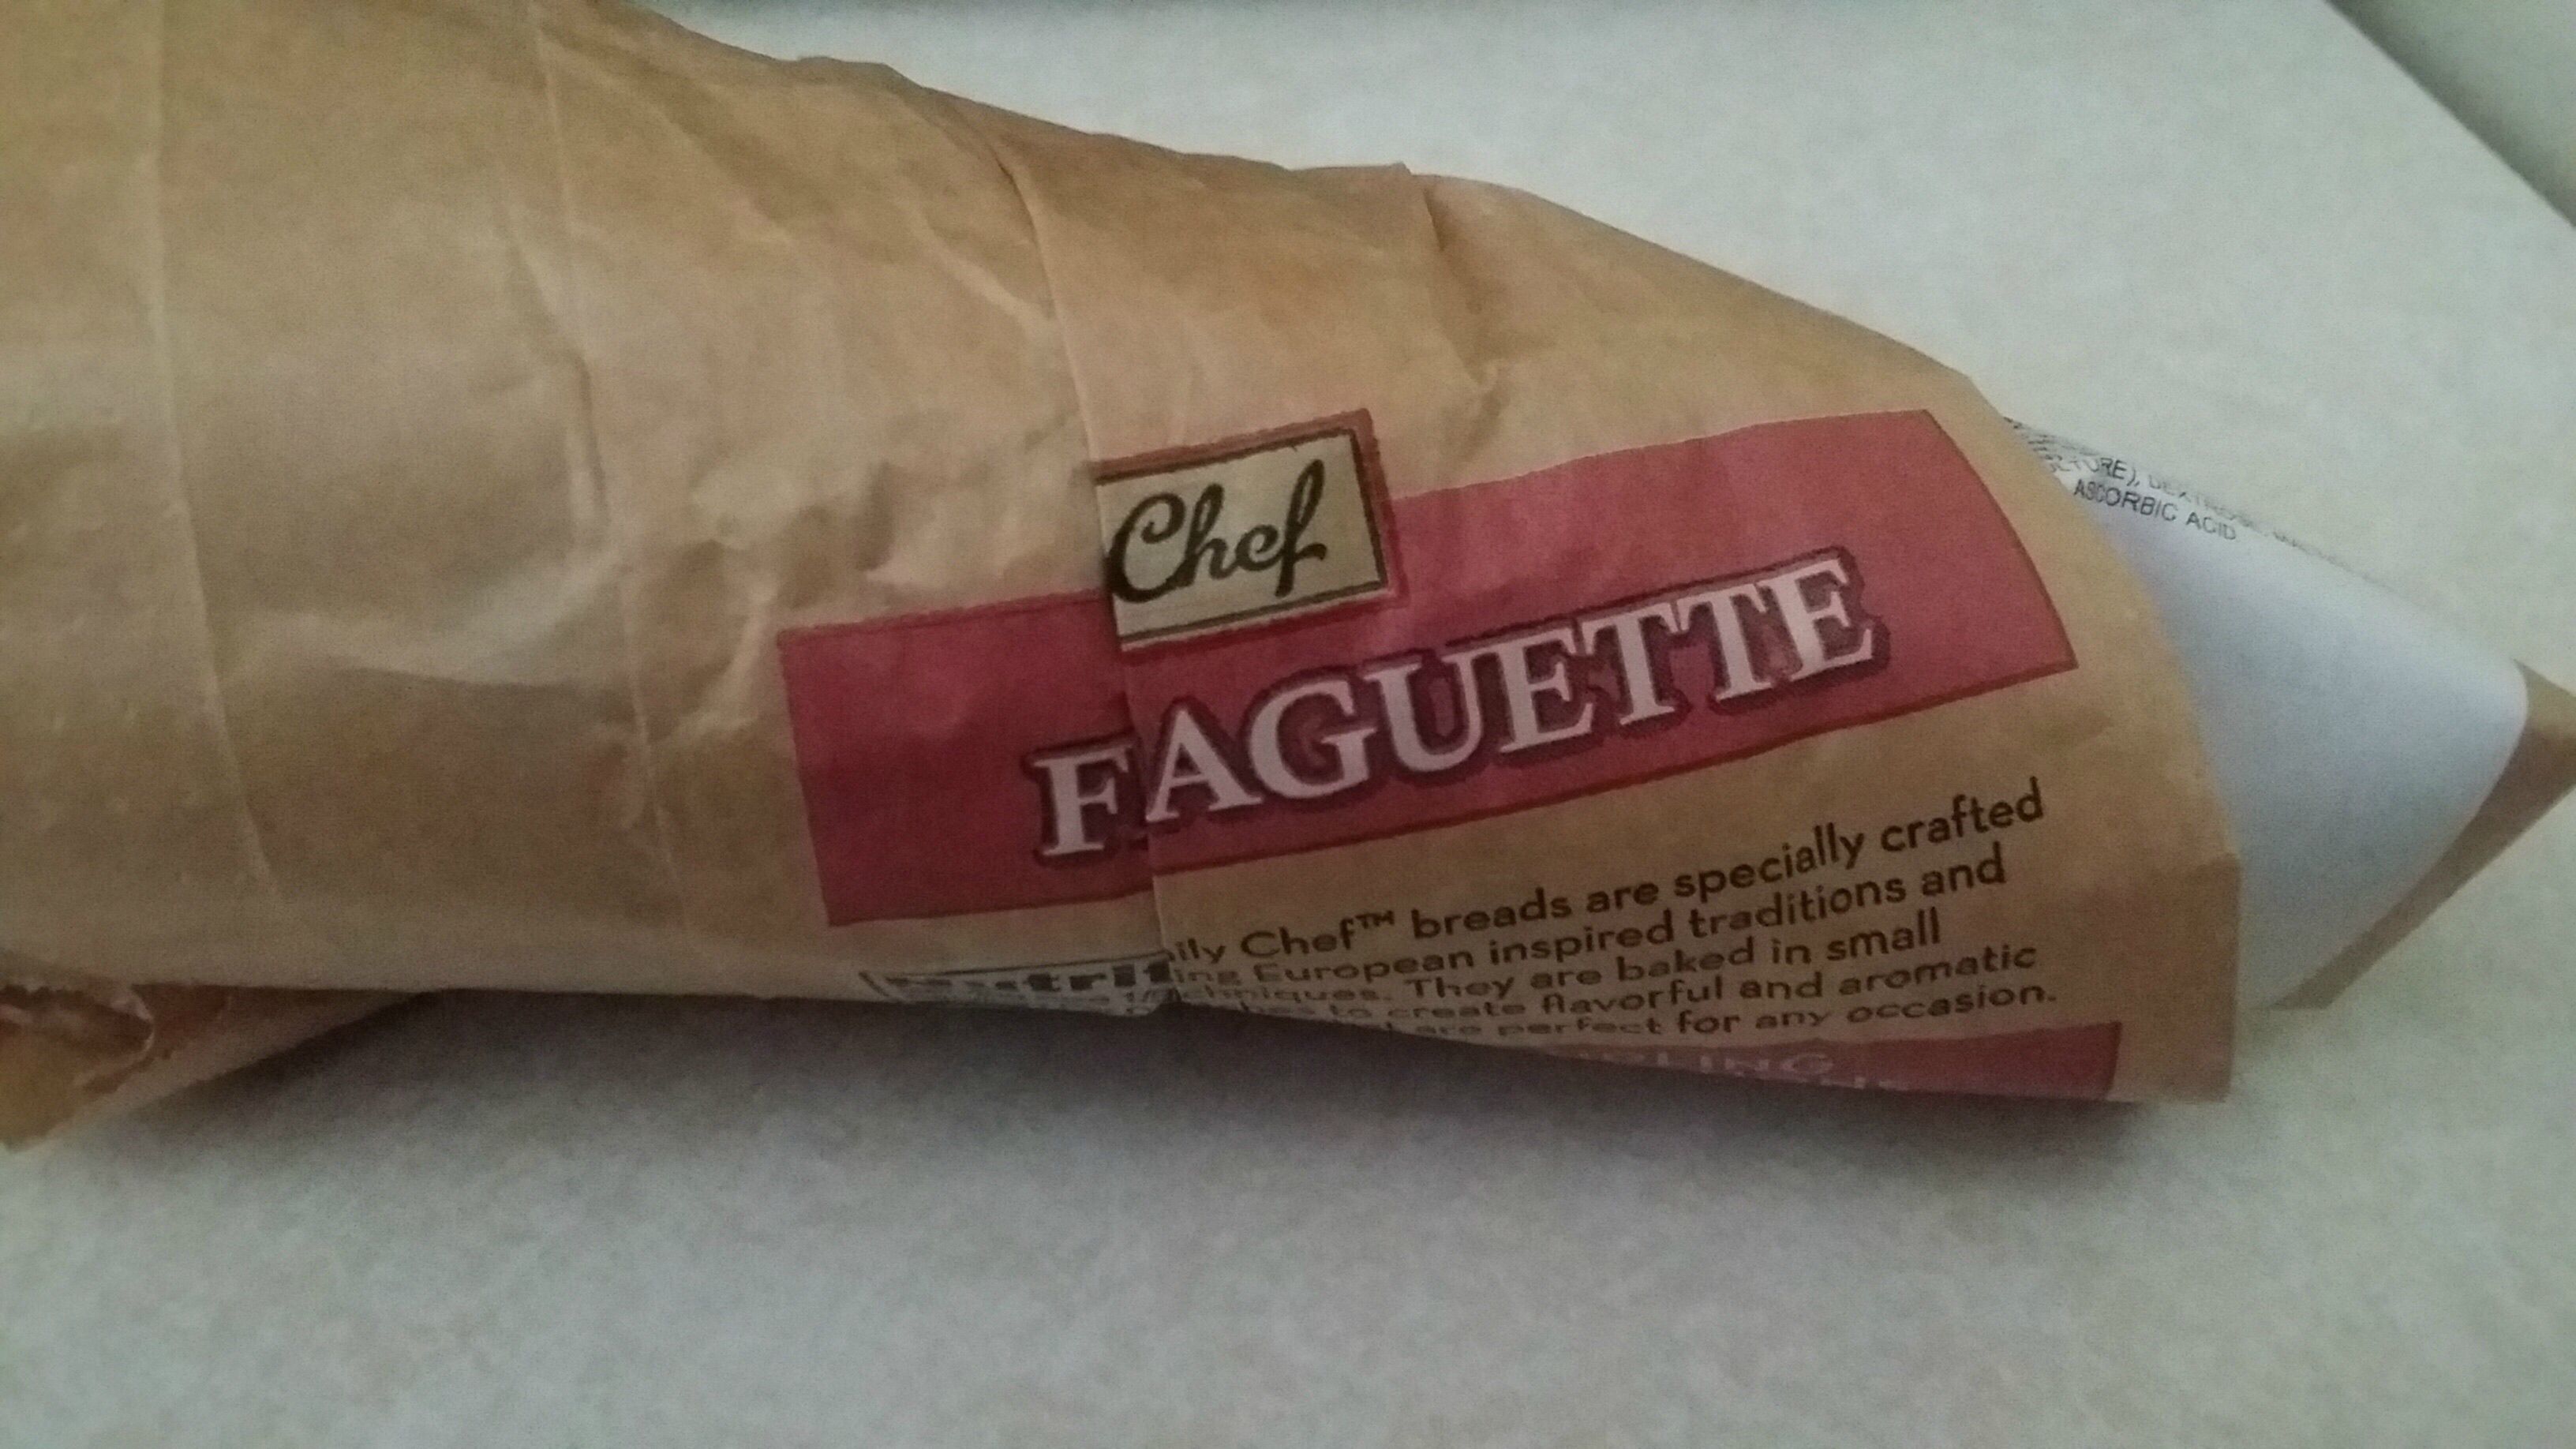 faguette baguette - Chef Faguette Shef breads are specially crafted een inspired traditions and bed in small hvorful and remate